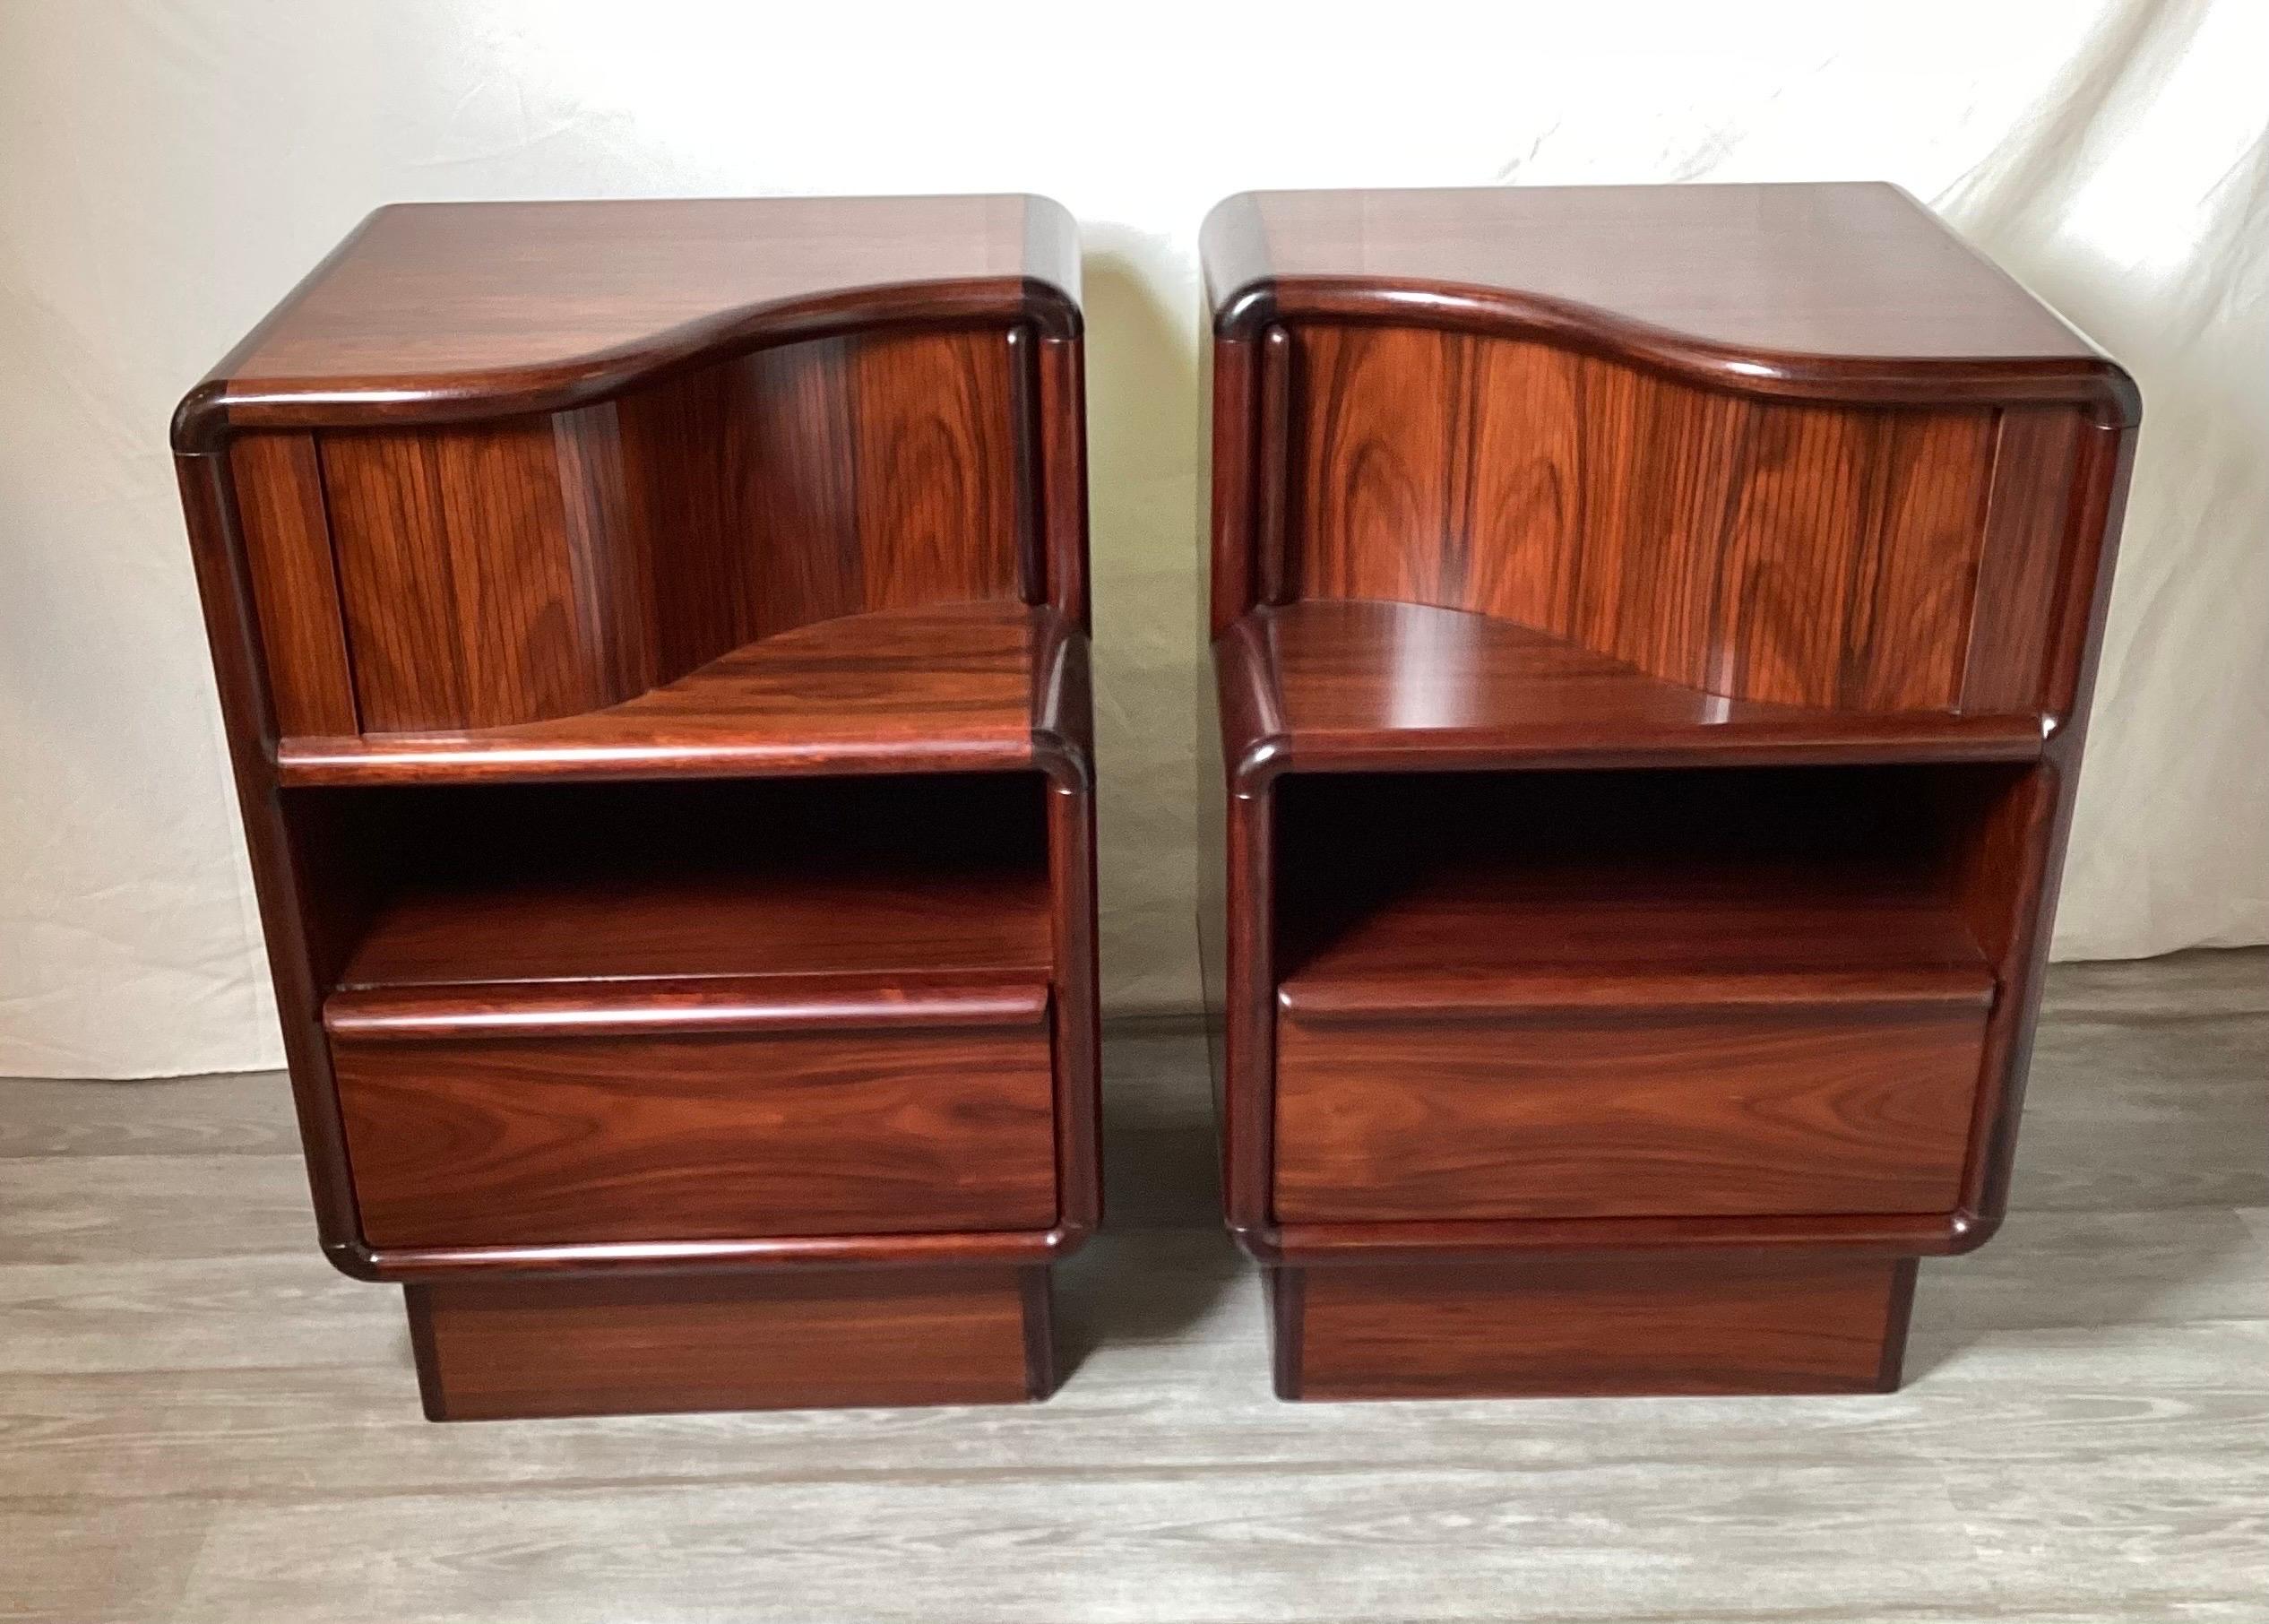 A pair of chic rosewood end tables, night stands with tambour door tops. The well designed chests with storage in three sections, the tambour top, the open shelf center and the drawer at the bottom.